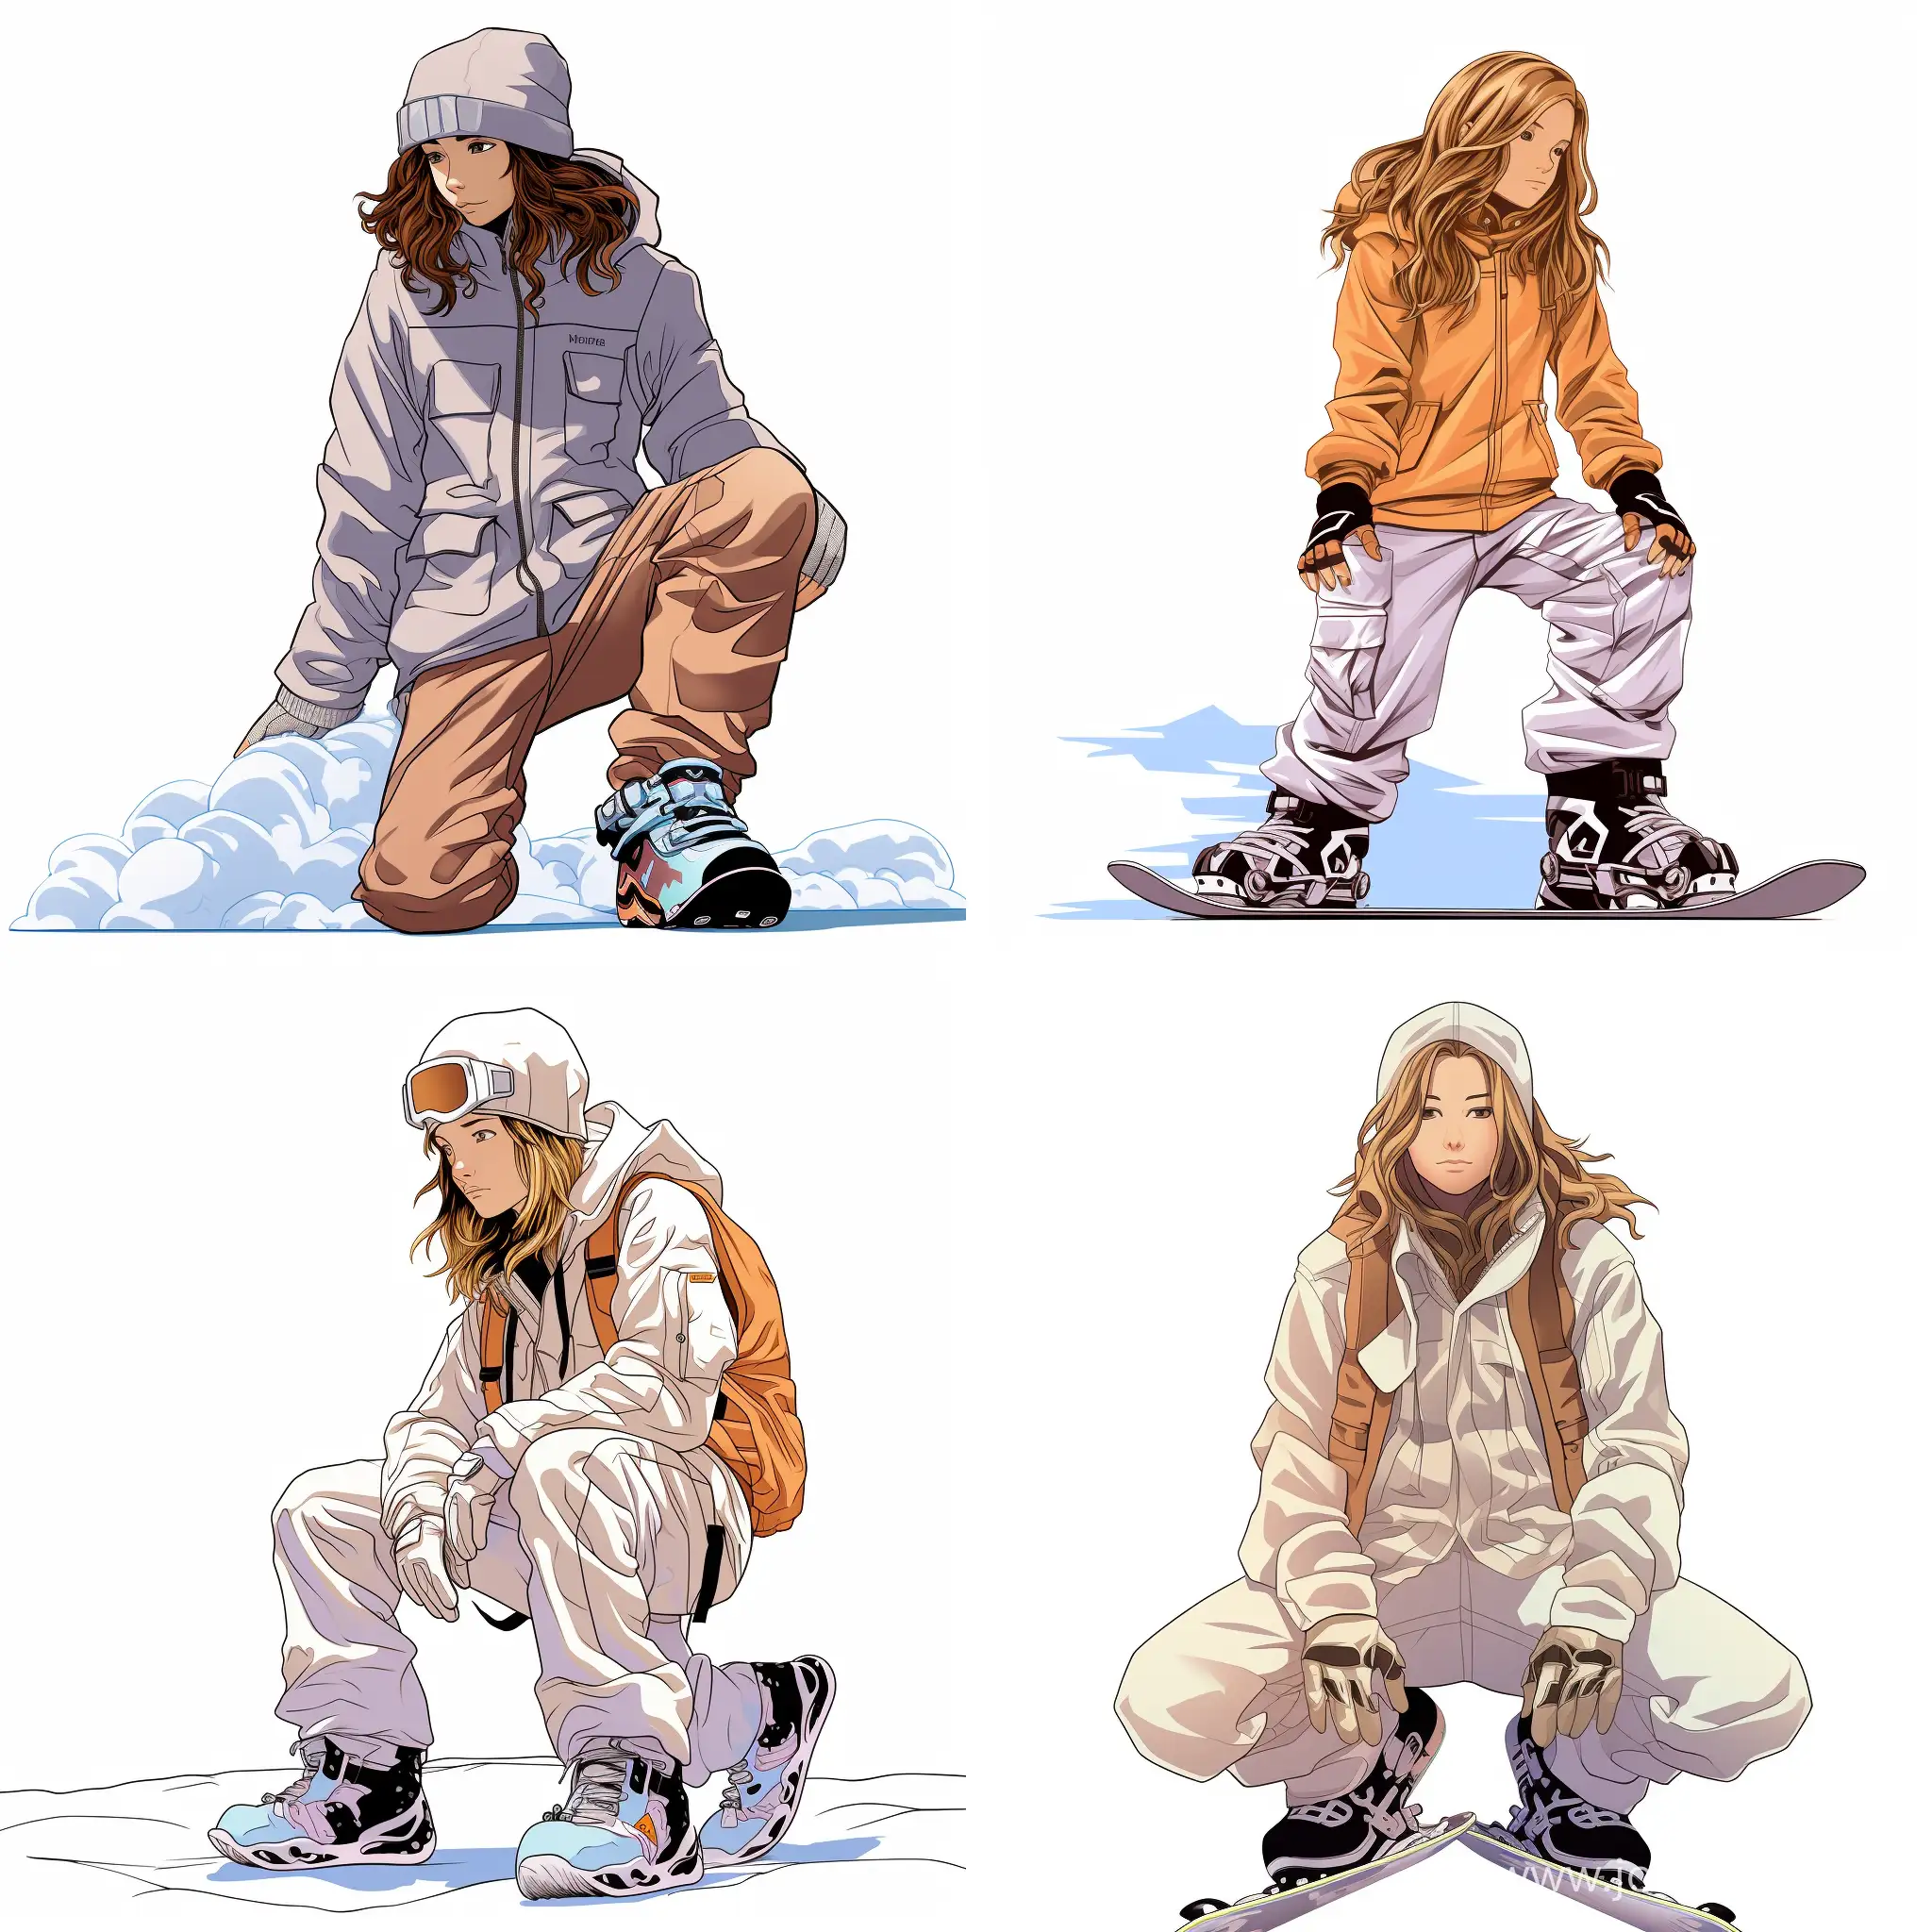 Manga-Style-Snowboarder-in-Crop-Top-and-Snowboard-Gear